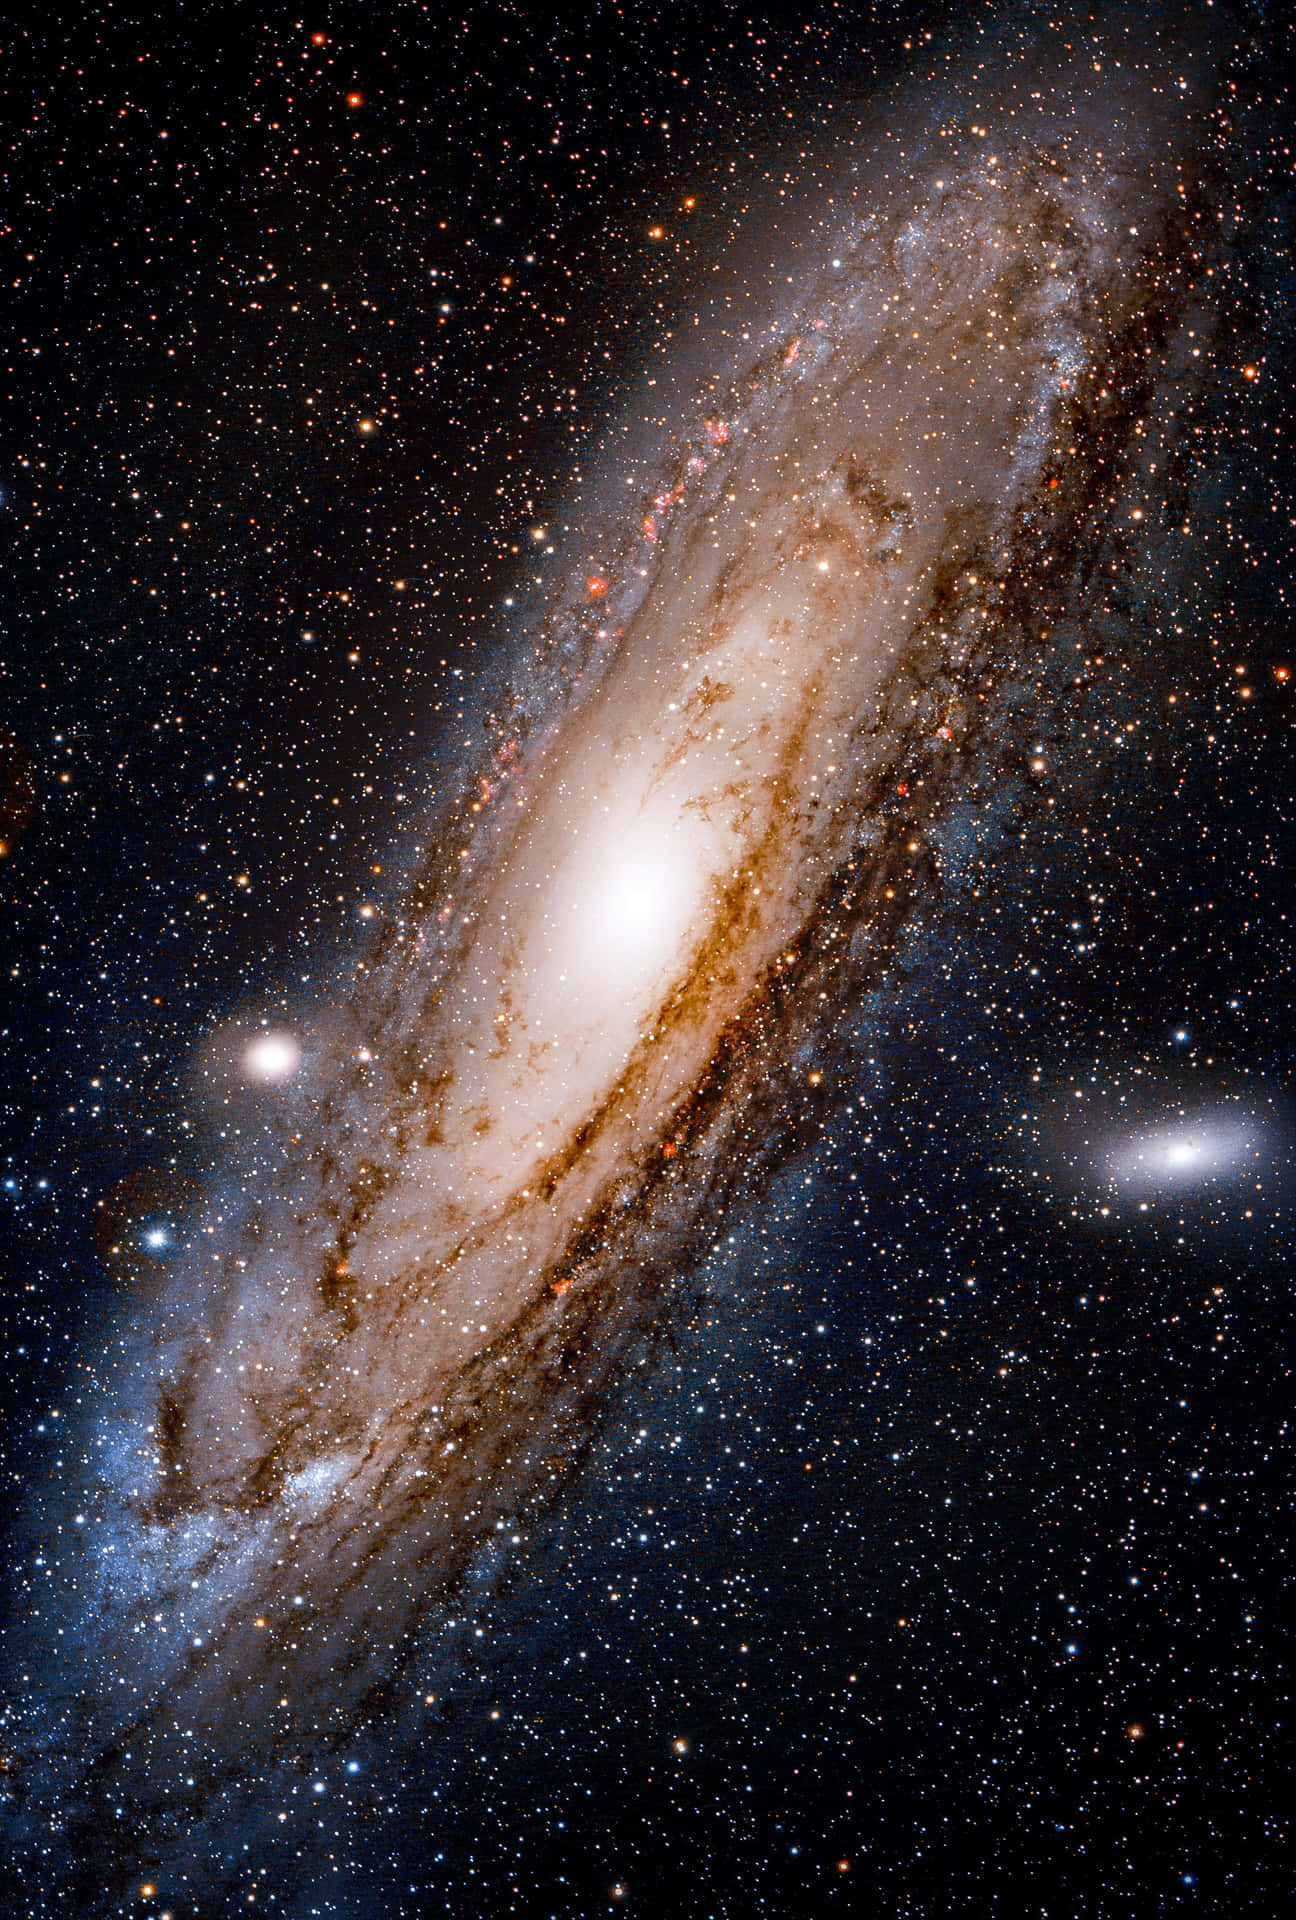 The Andromeda Galaxy captured in glorious 4K resolution. Wallpaper